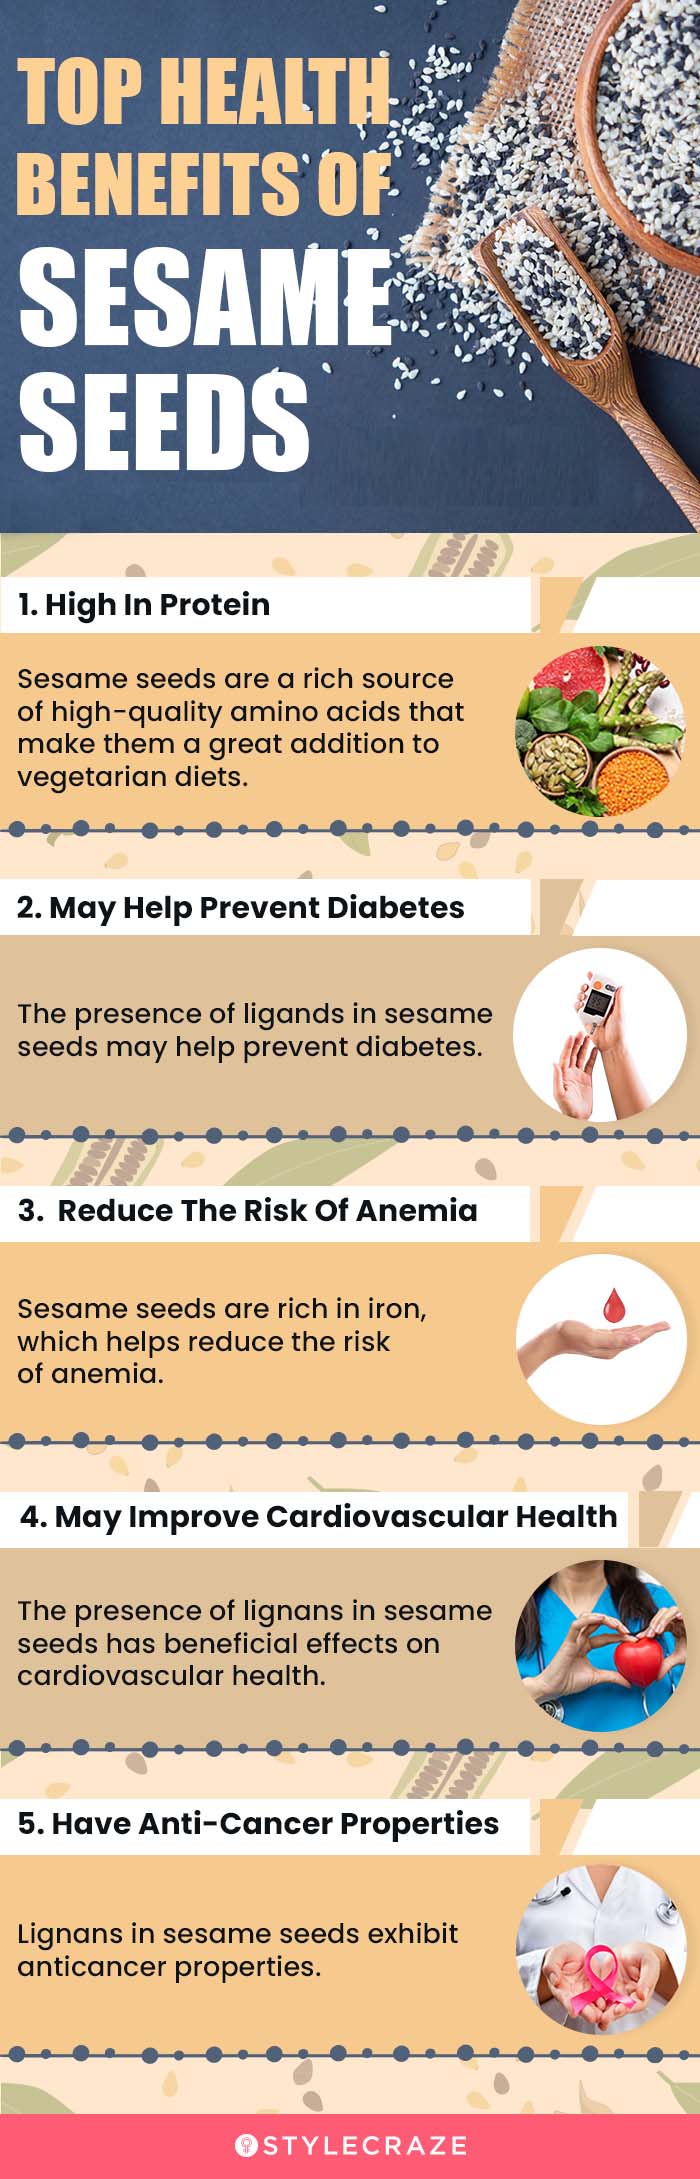 top health benefits of sesame seeds [infographic]